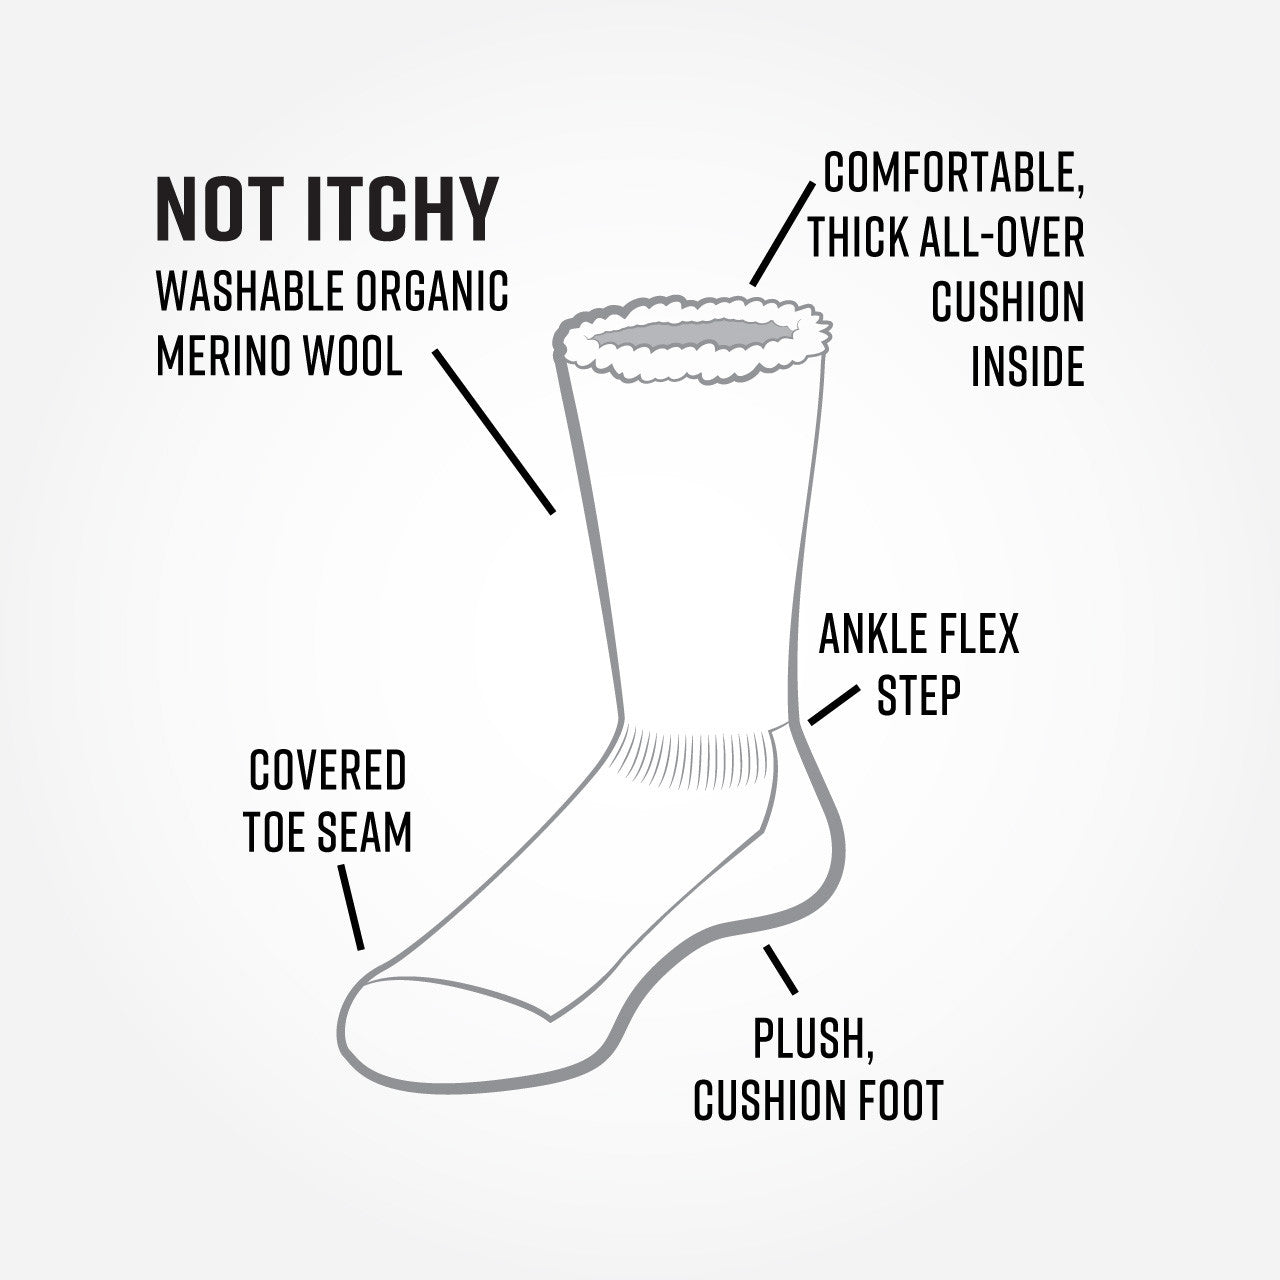 an informative graphic depicting a sock with text around it that says 